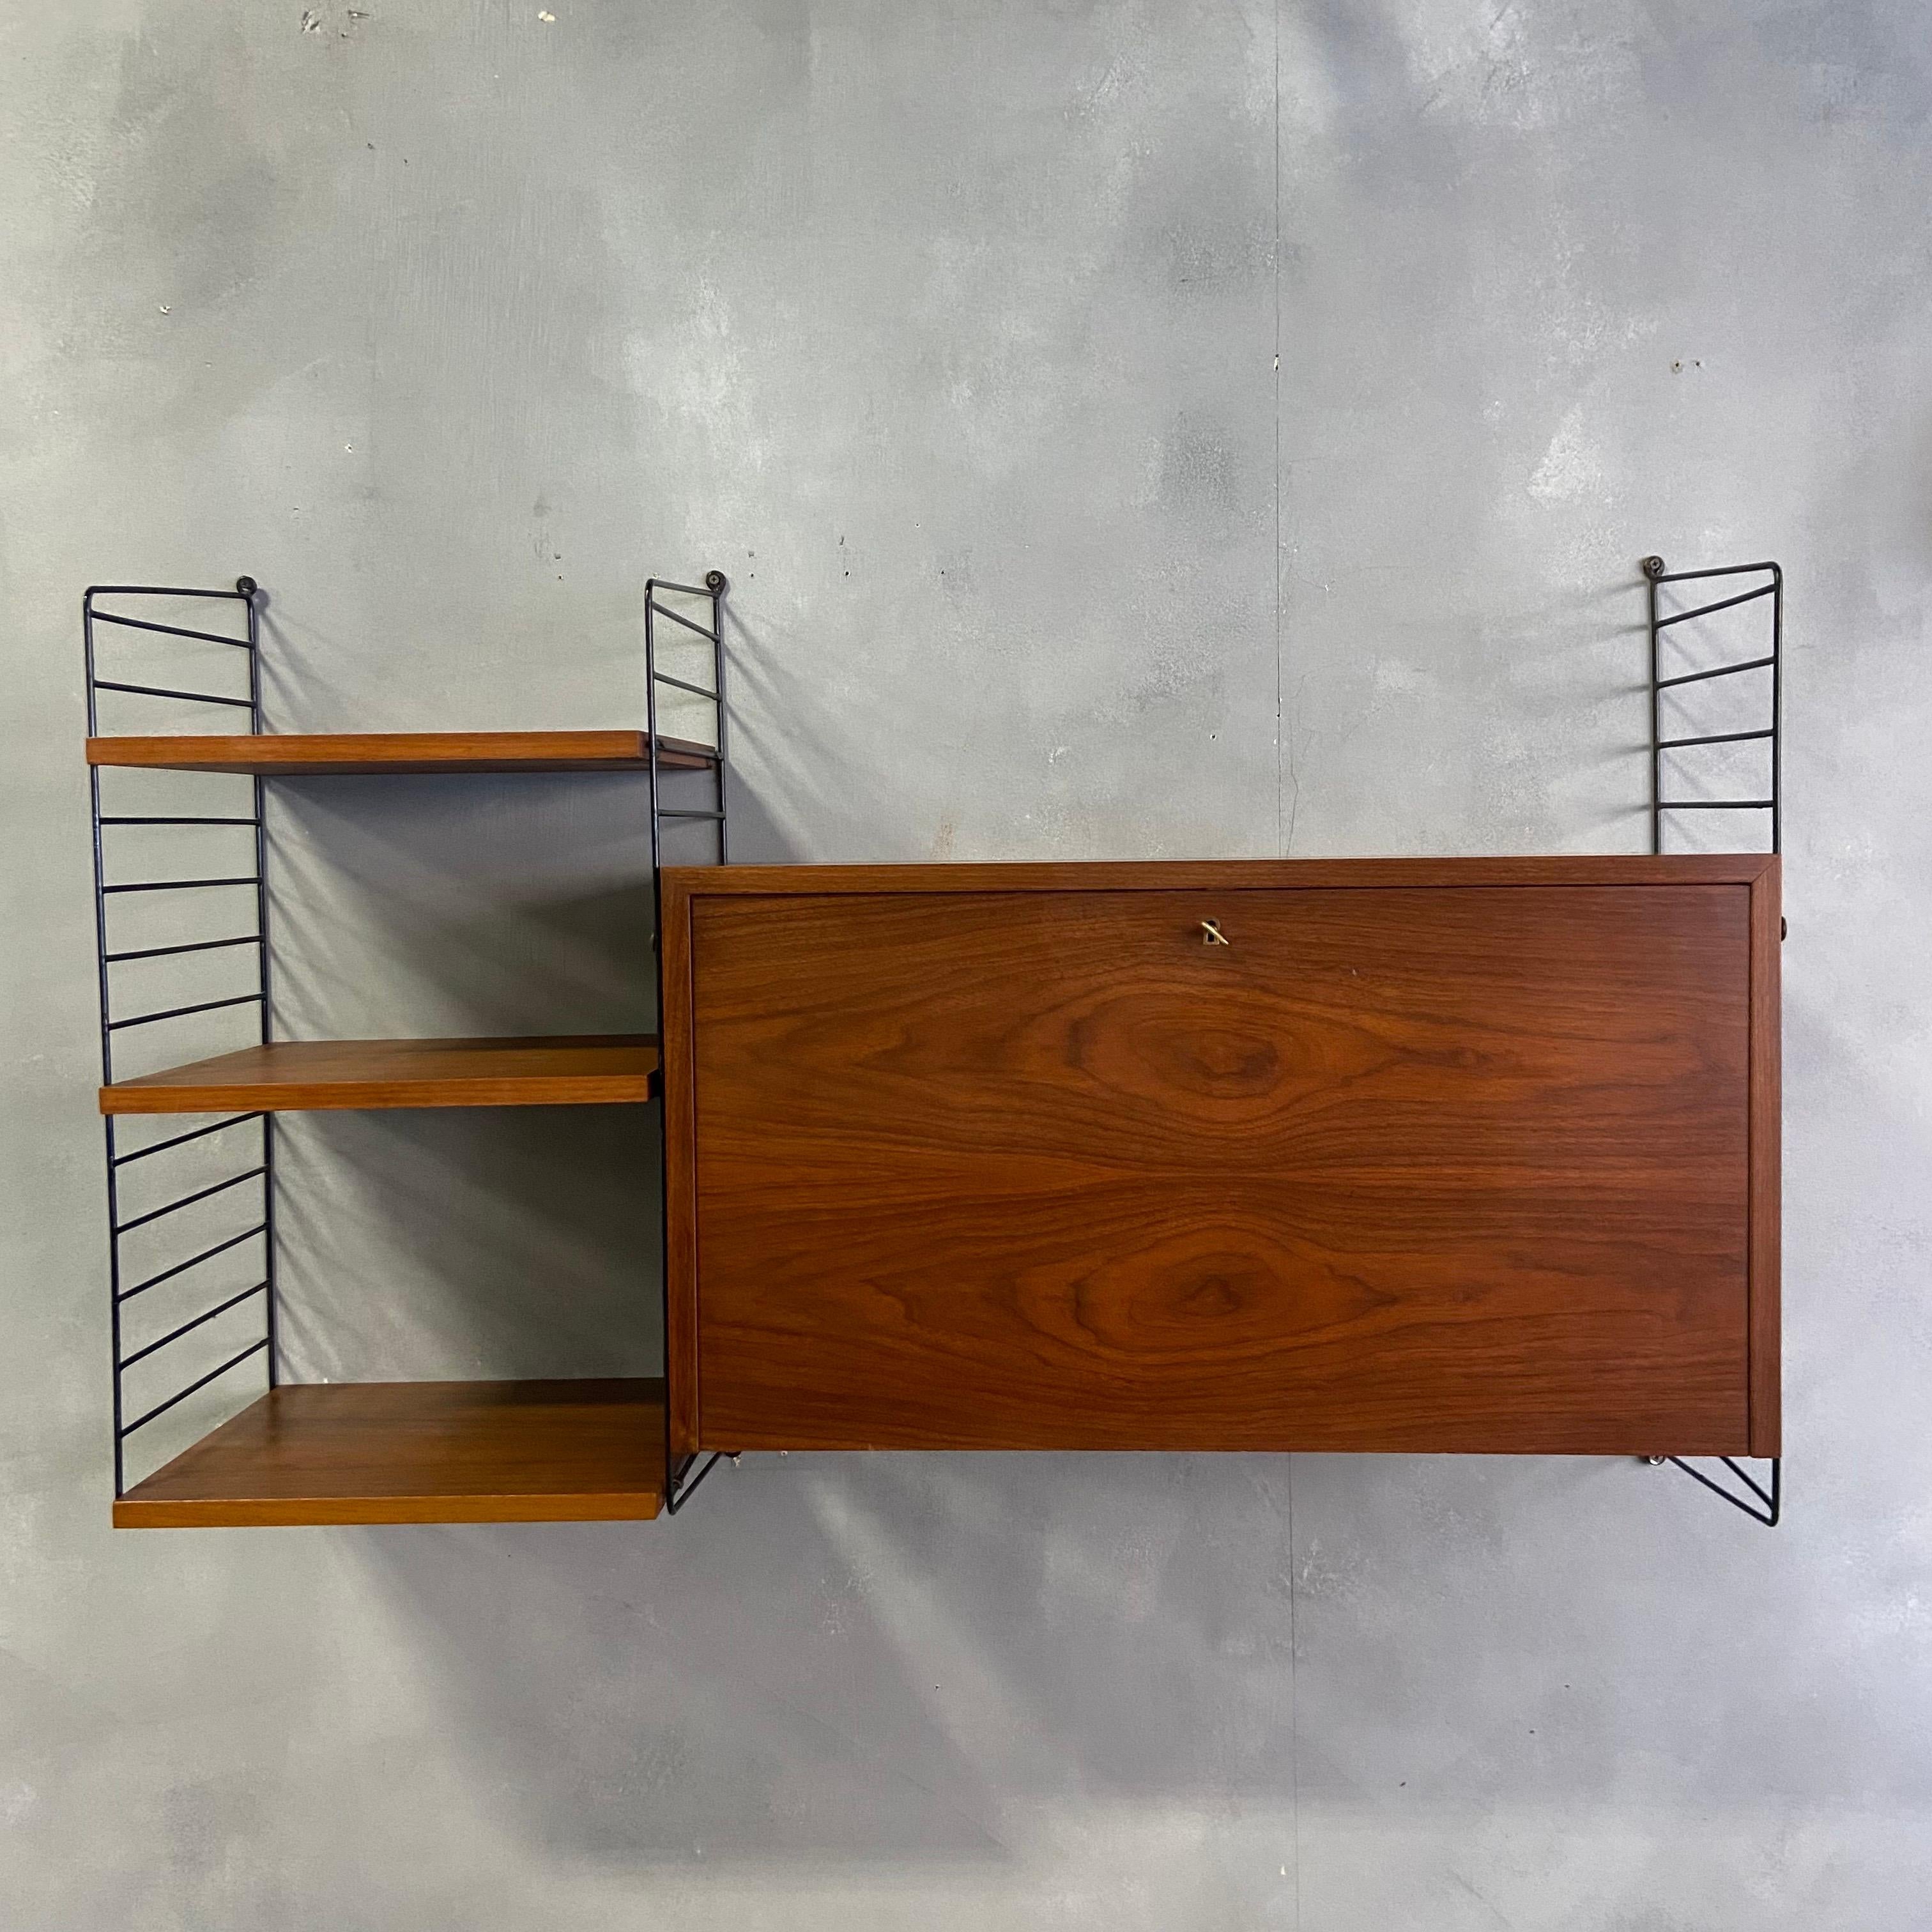 Beautiful Patina on this dark teak String Unit original from 1950. Featuring three 16'' wide shelves and a drop down cabinet / secretary concealing three dovetailed drawers in birch wood. All parts are adjustable along the ladder work using the